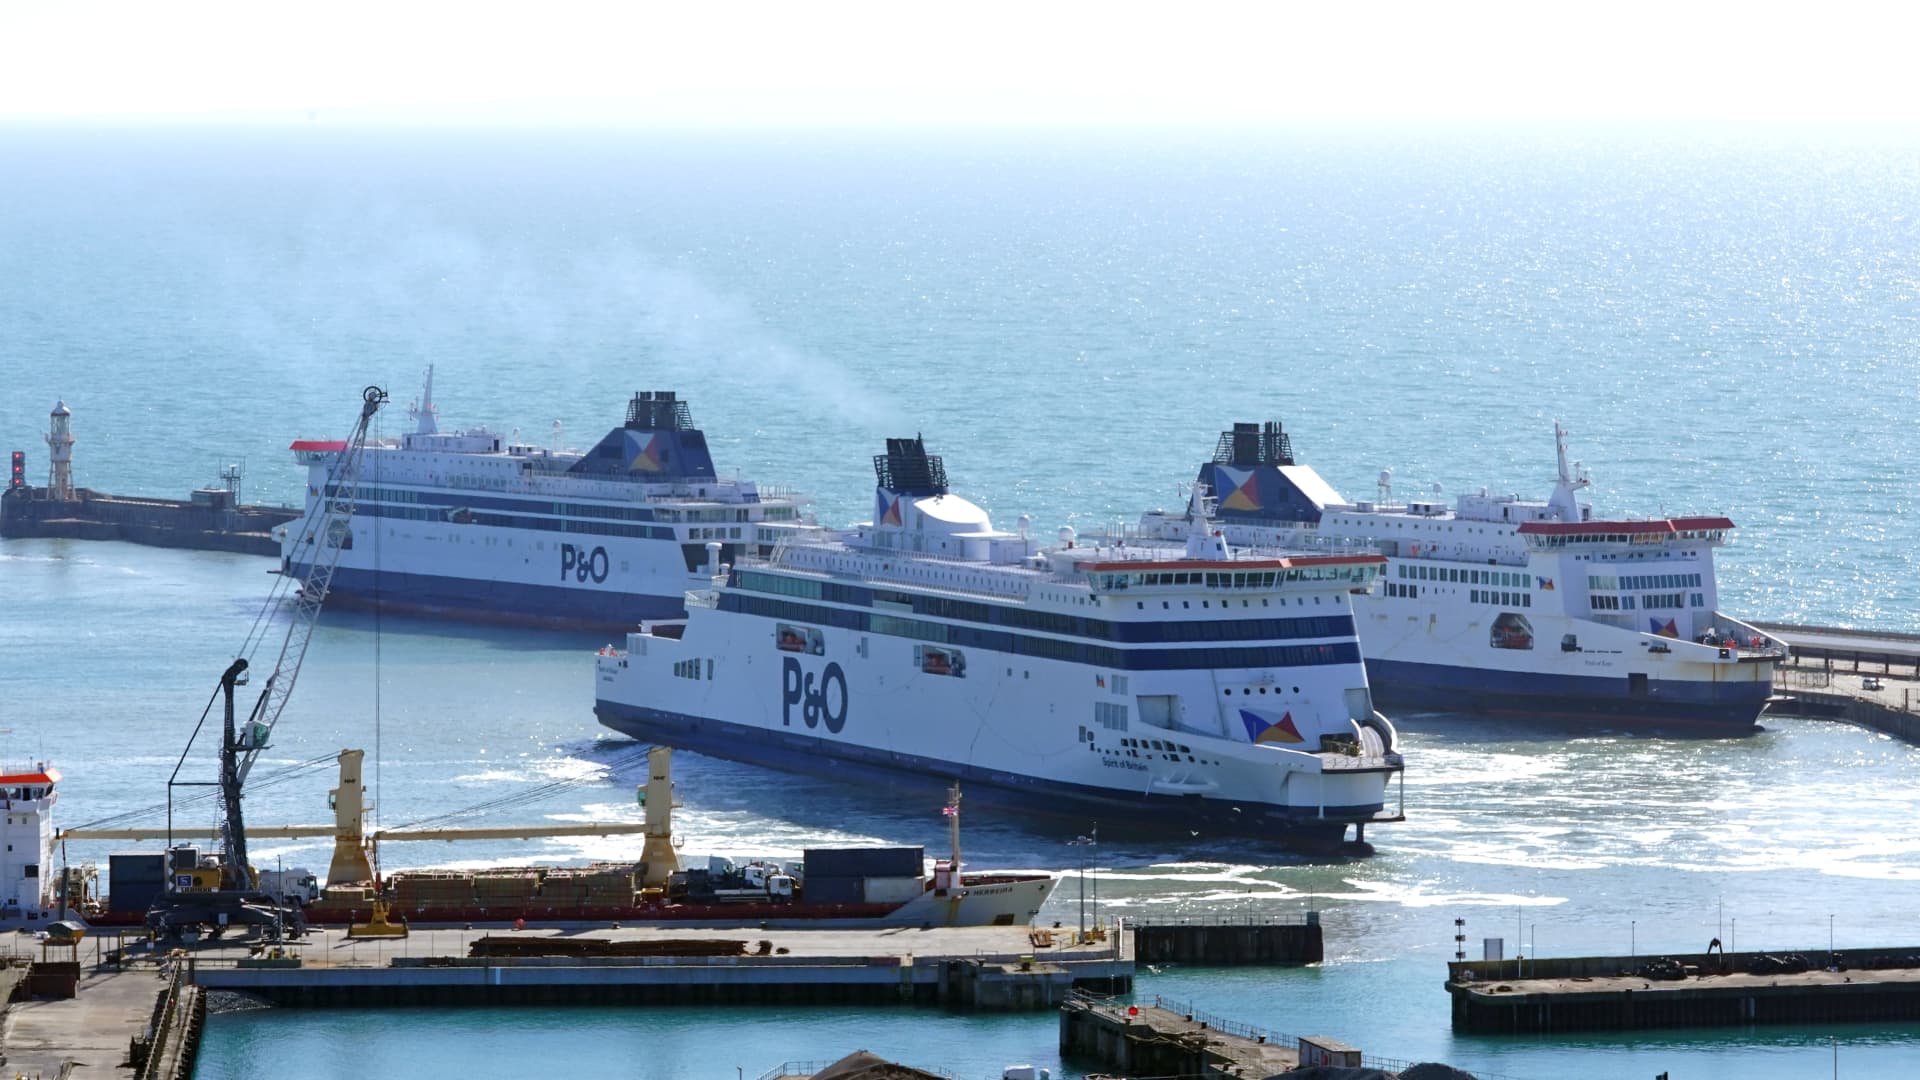 Britain’s P&O Ferries lays off 800 staff and suspends sailing, saying its business is ‘not sustainable’